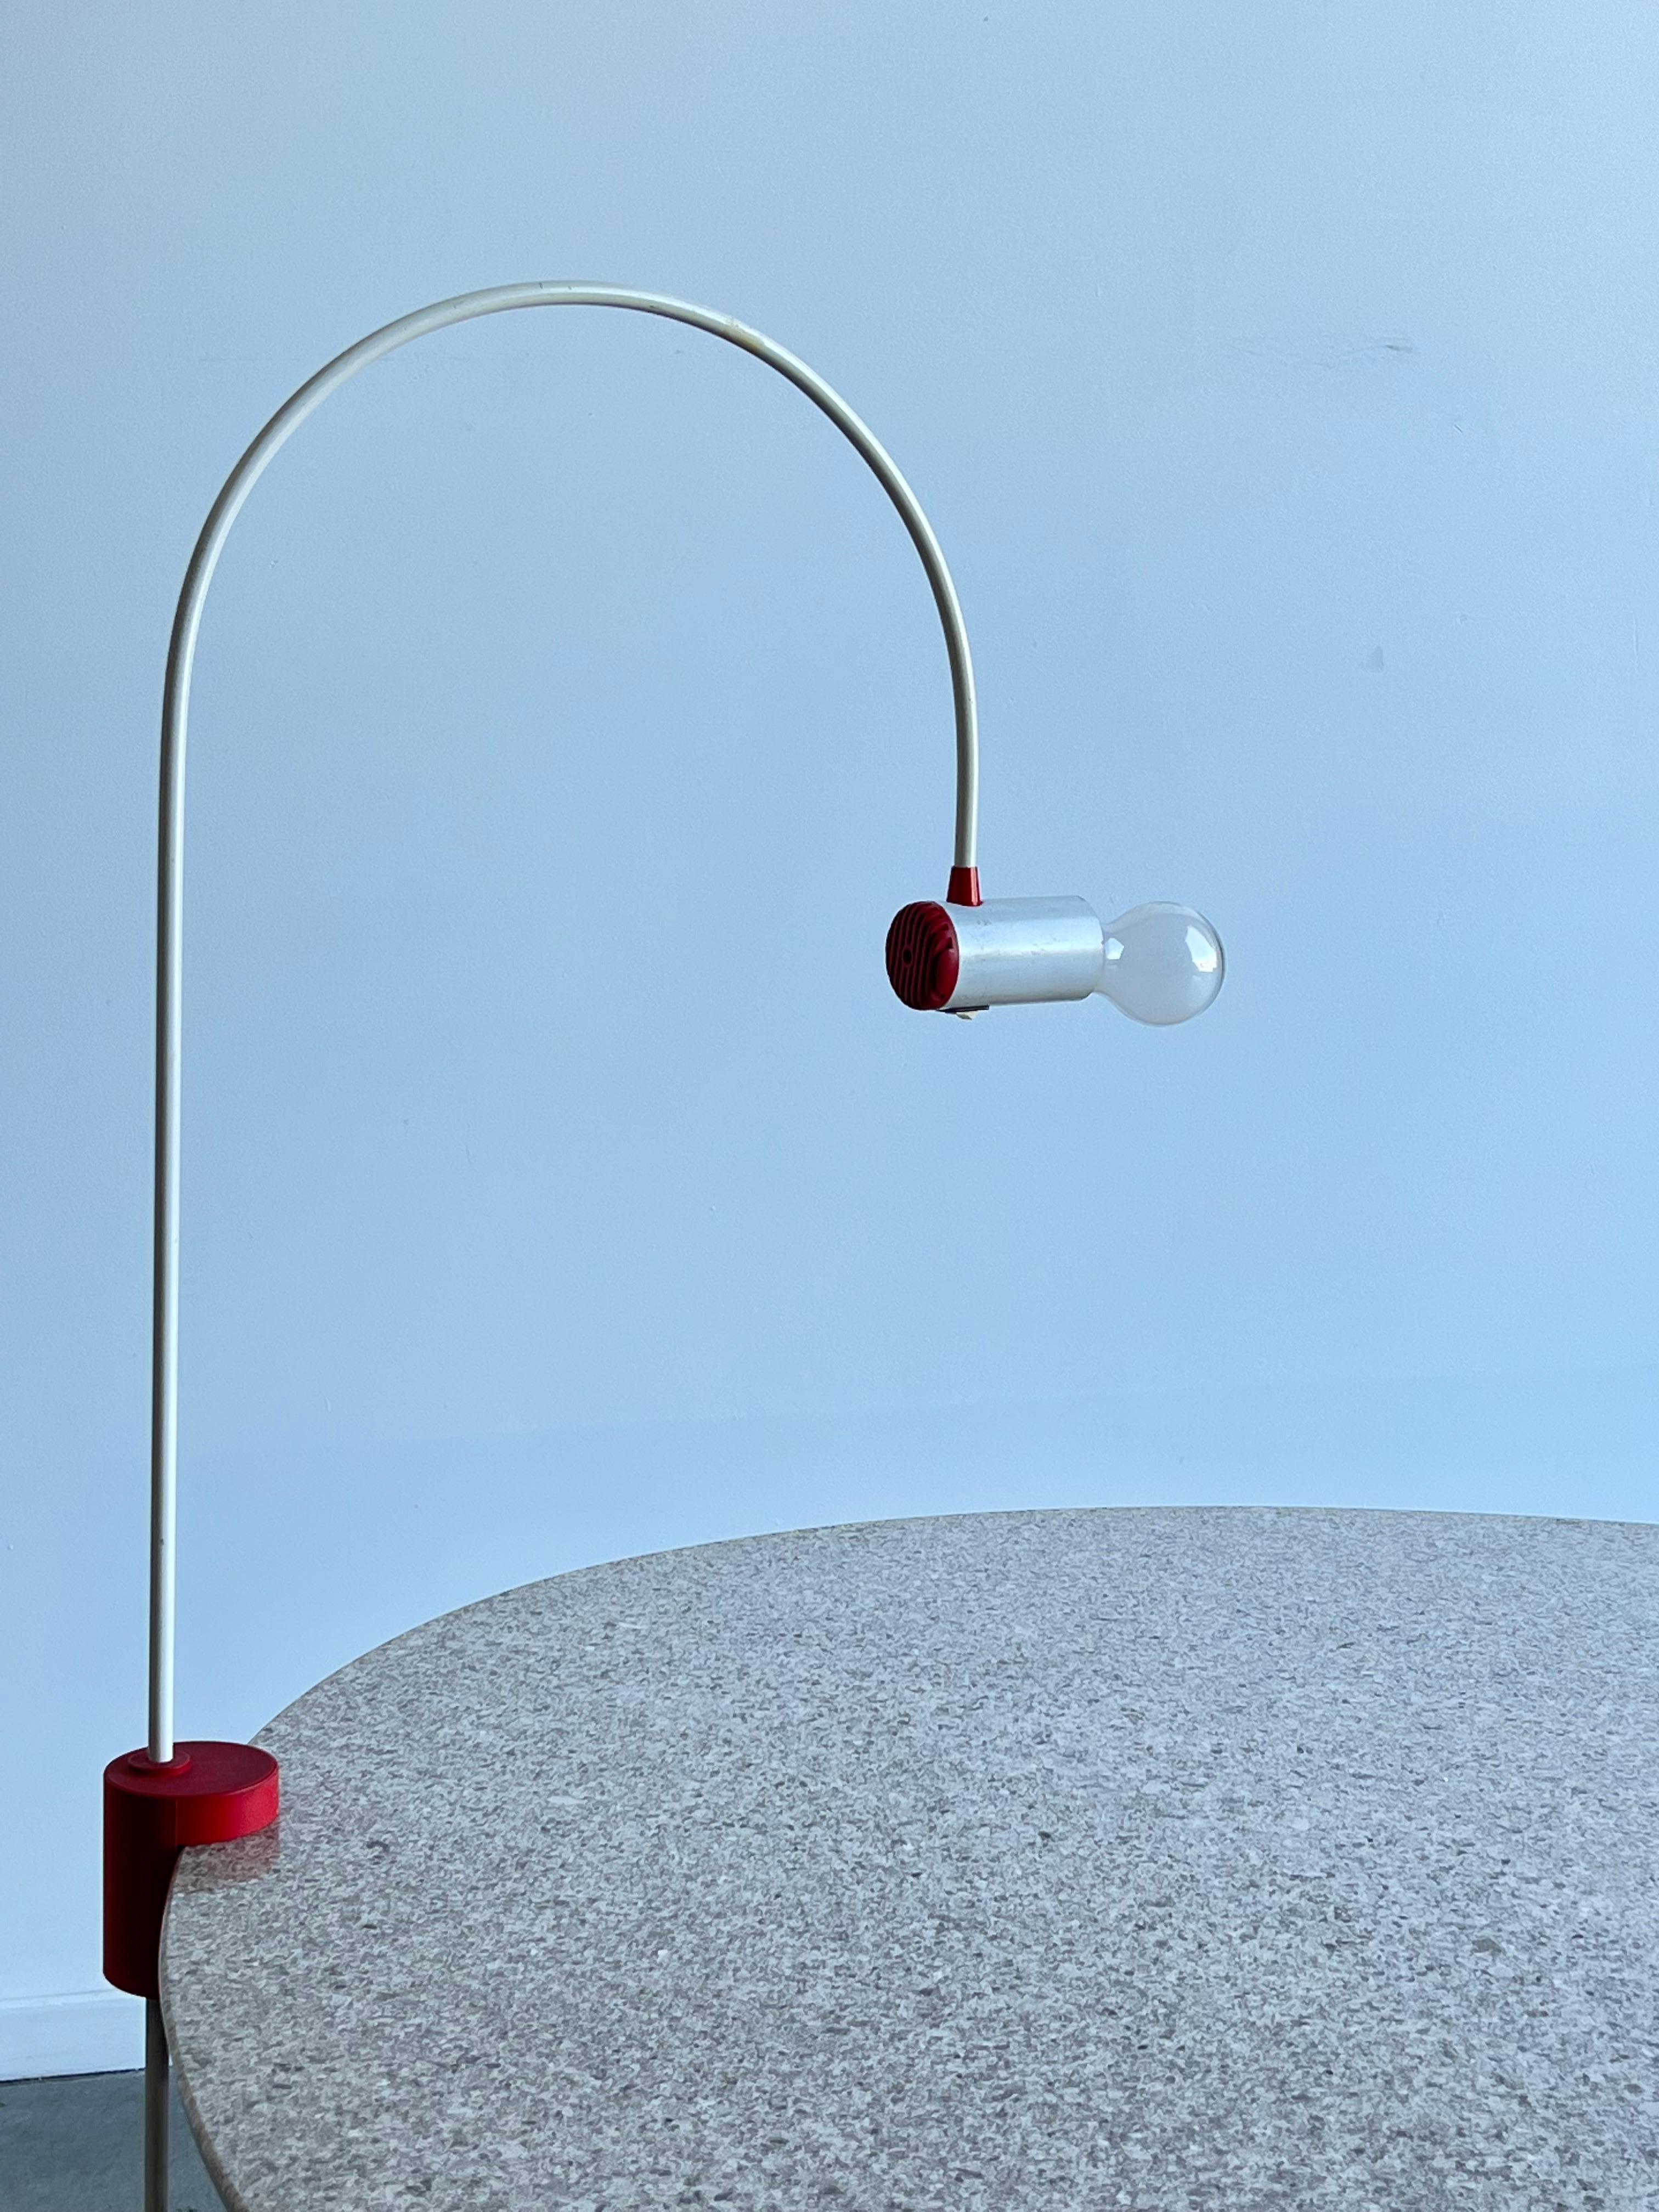 Targetti Arc Table Lamp In Good Condition For Sale In Byron Bay, NSW